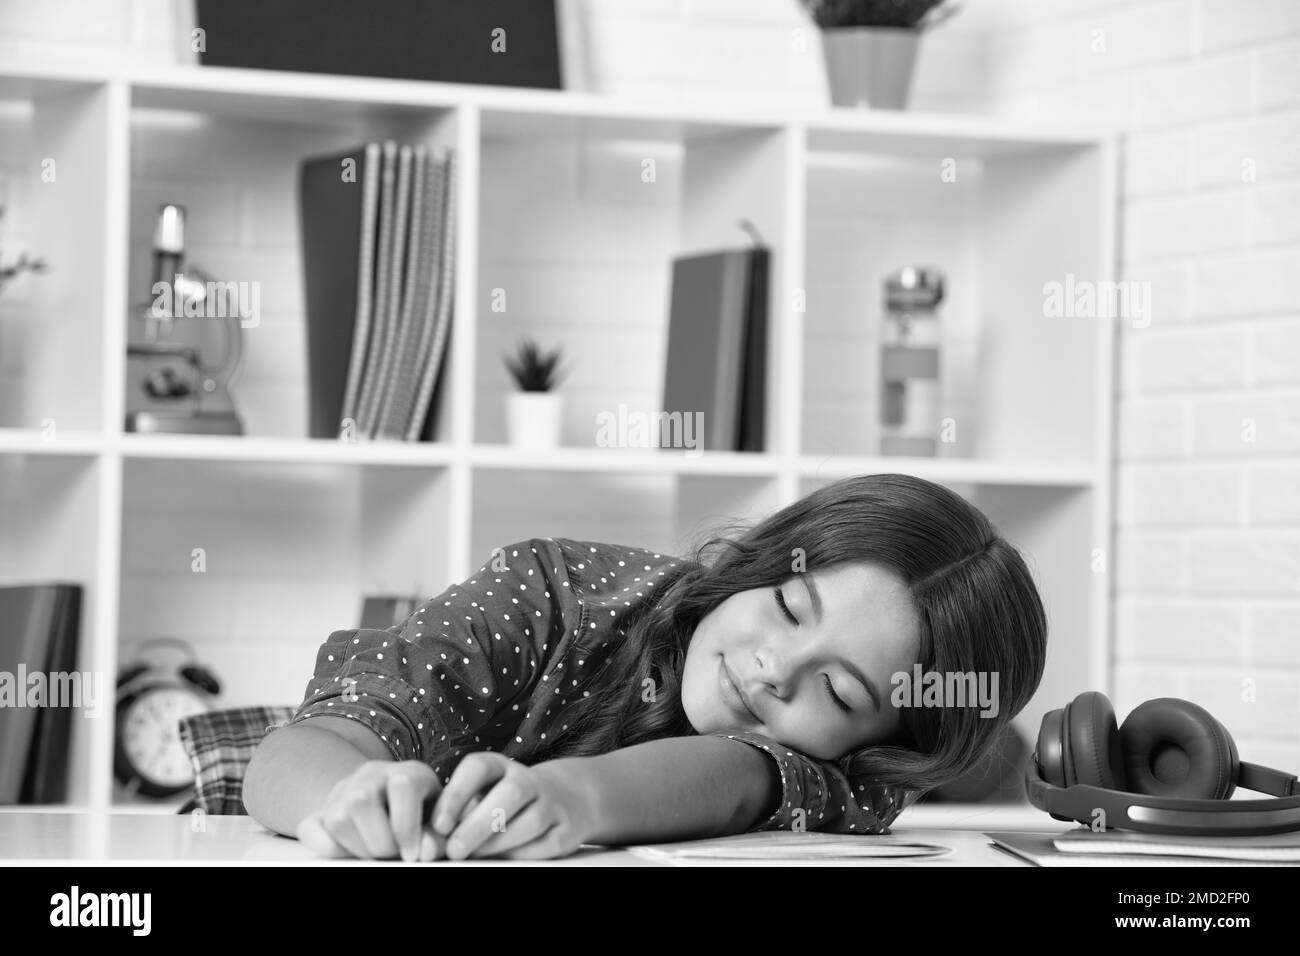 Tired and bored teenager school girl. Schoolgirl is sleeping while doing homework, tired from studying, exhausted. Stock Photo